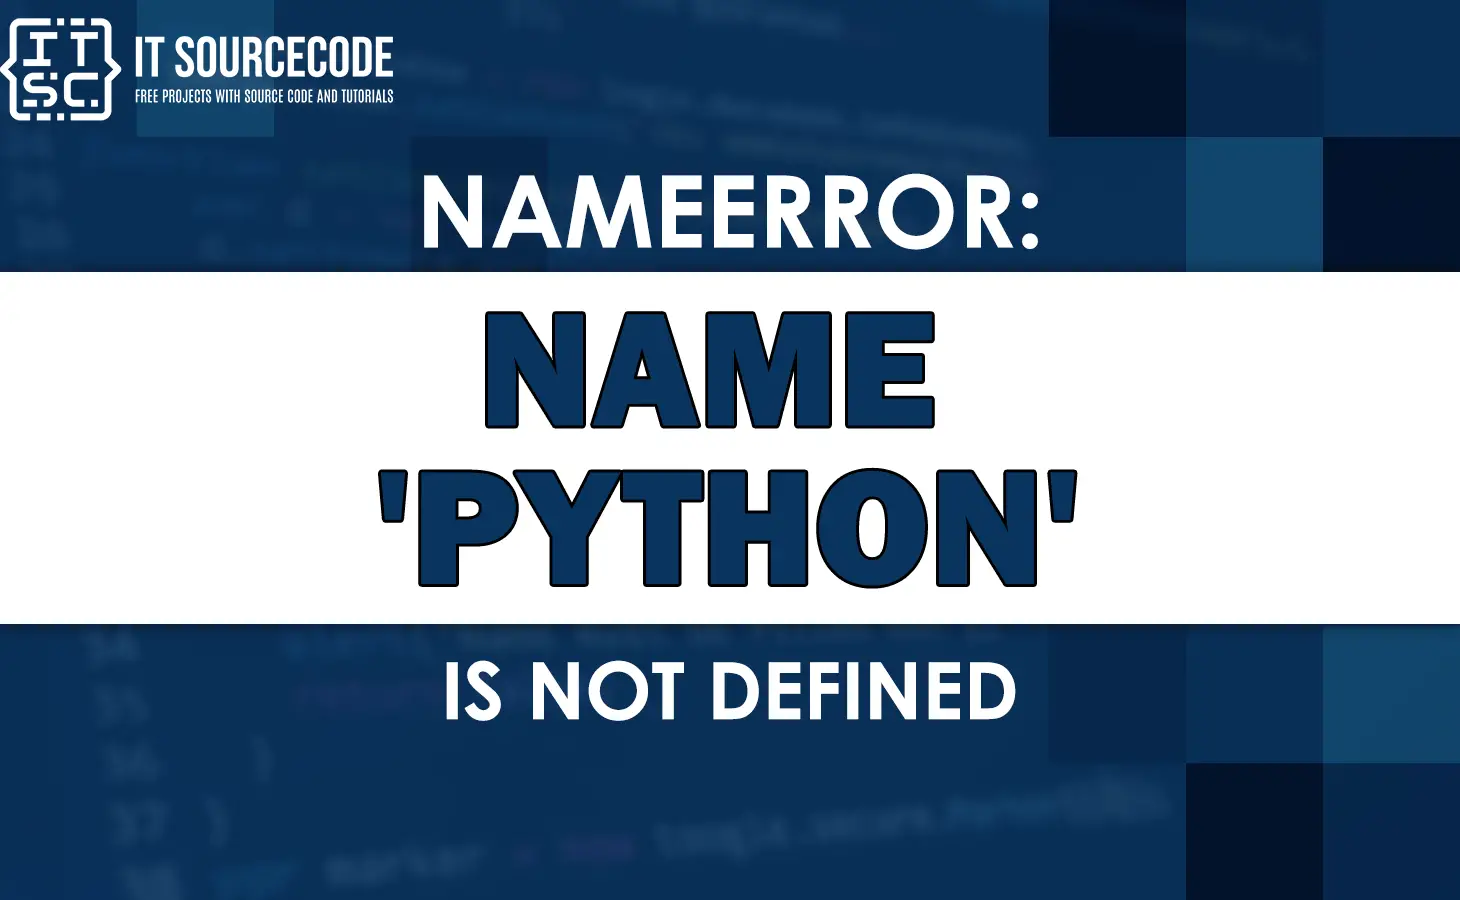 nameerror name 'python' is not defined